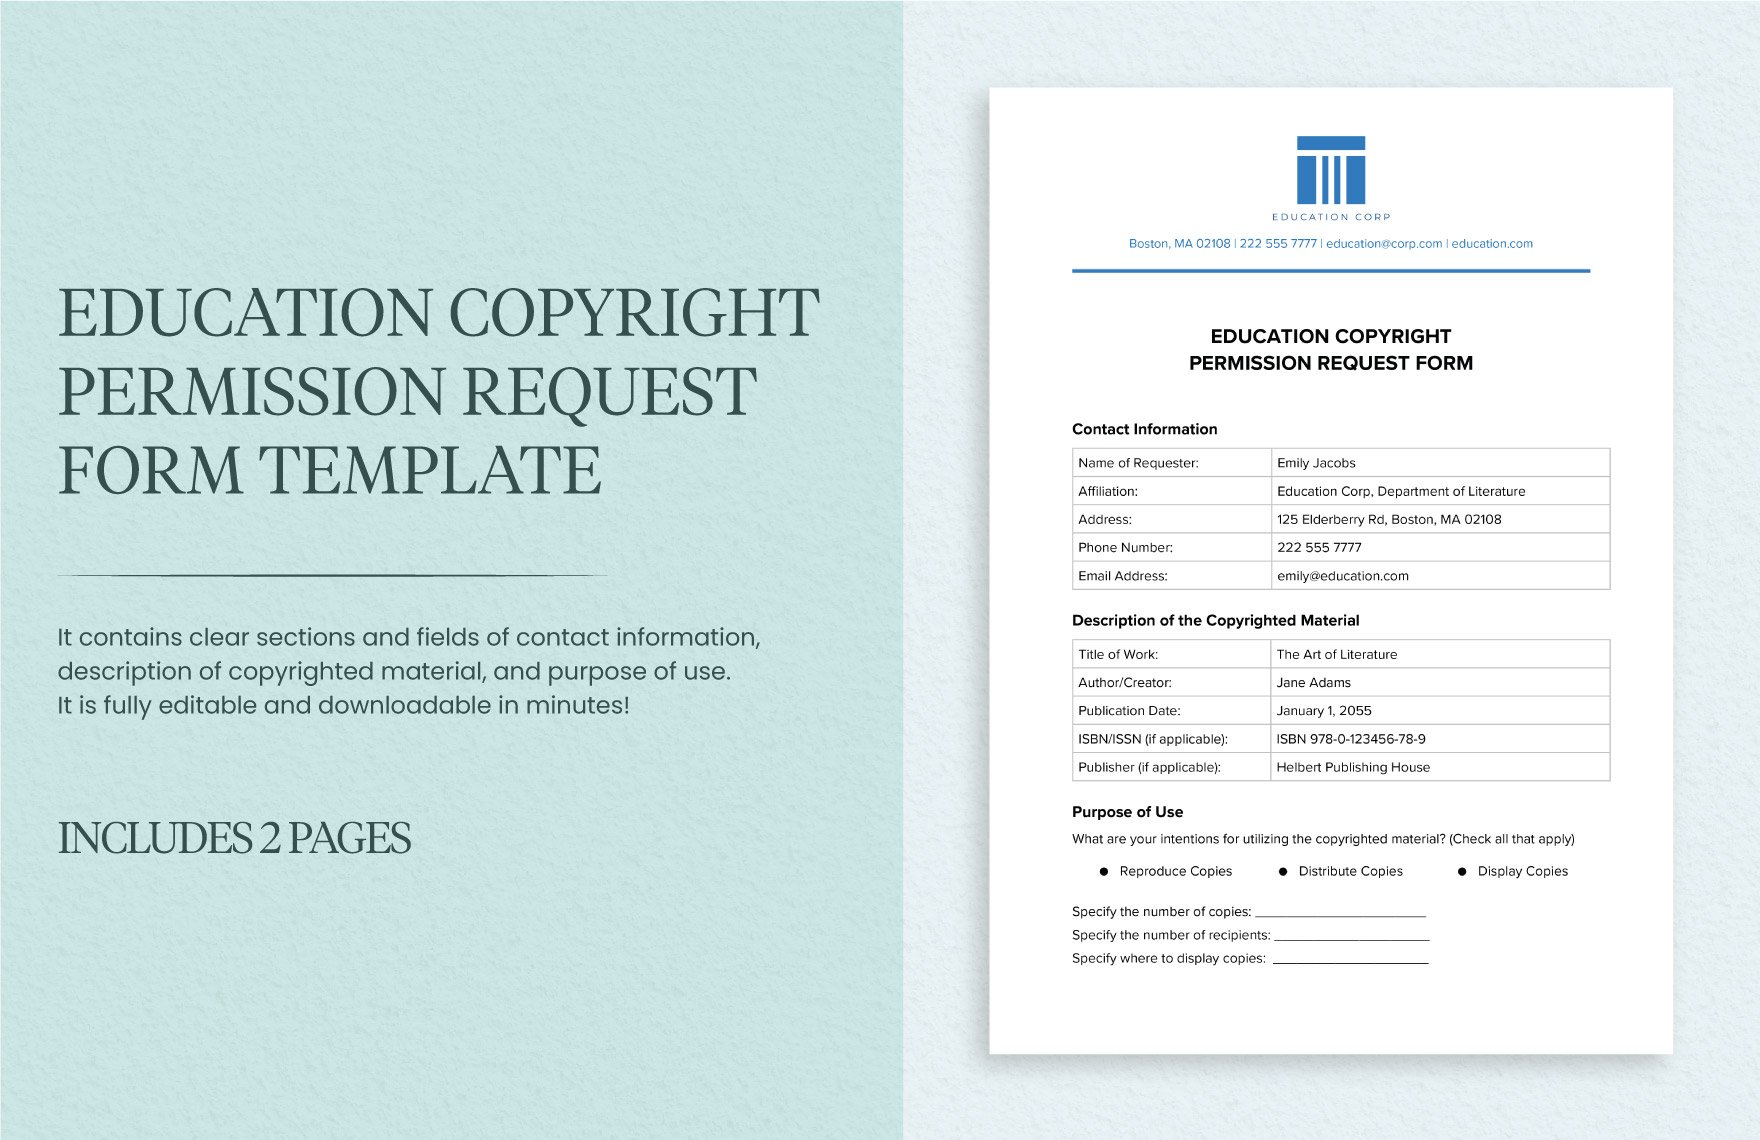 Education Copyright Permission Request Form Template in Word, Google Docs, PDF